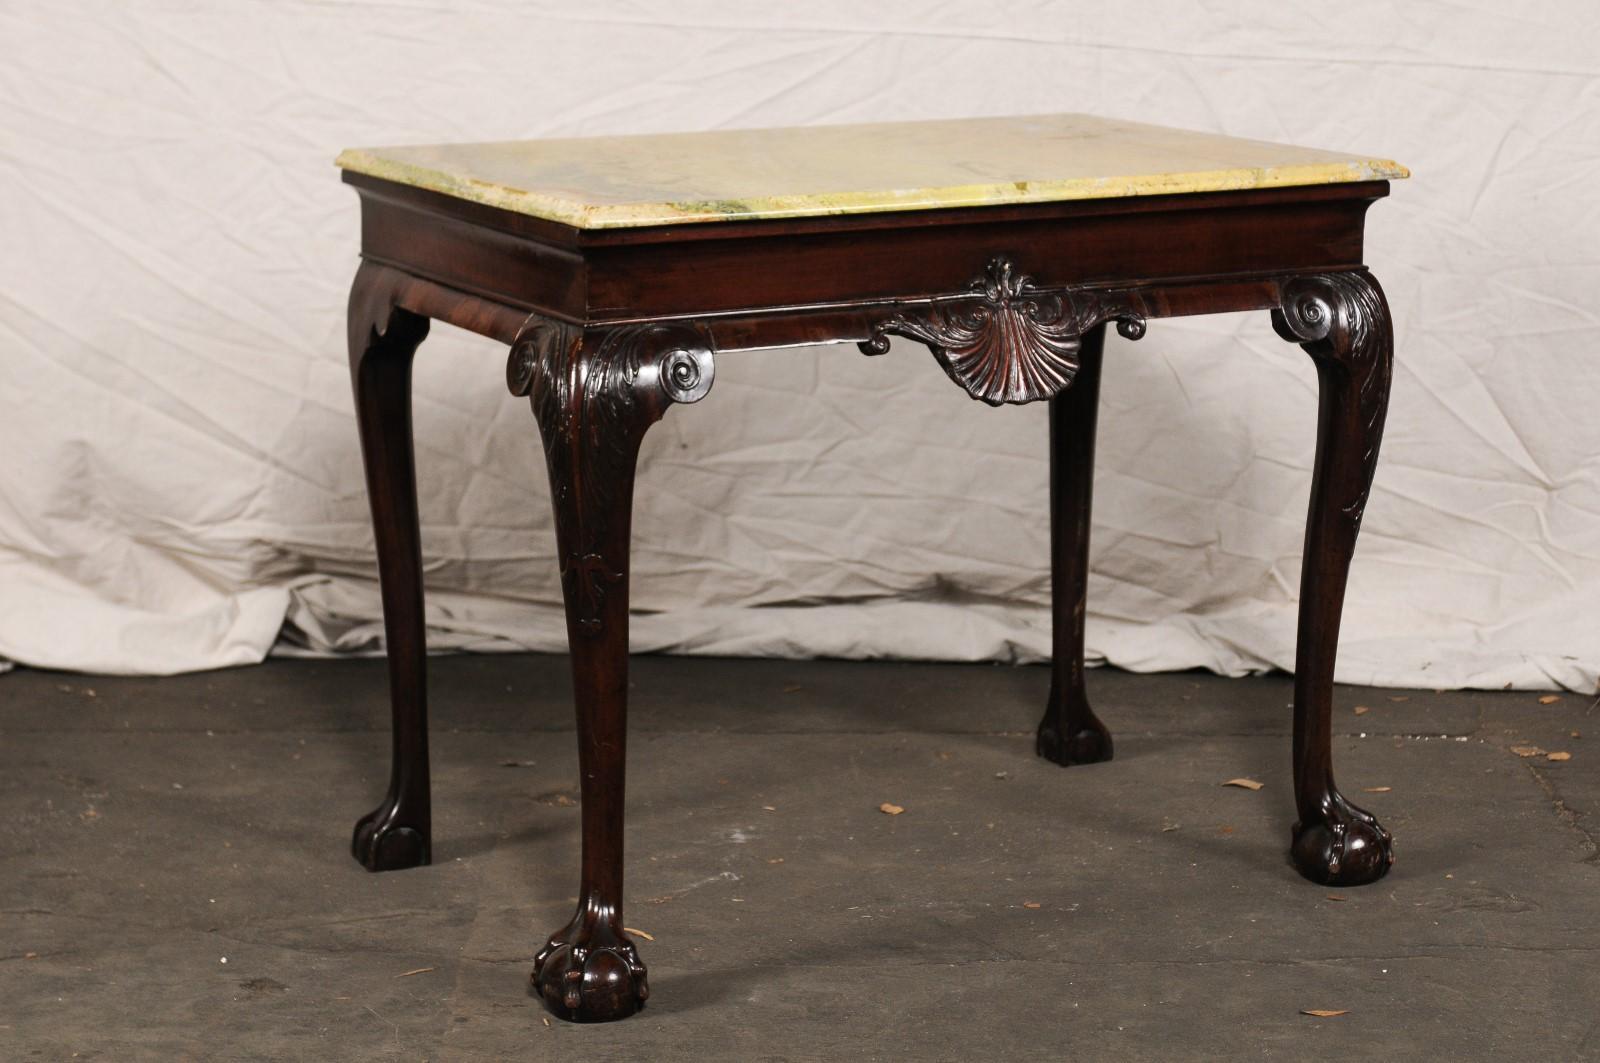 Probably 18th century Anglo-Irish mahogany slab serving table with shell motif, paw feet.